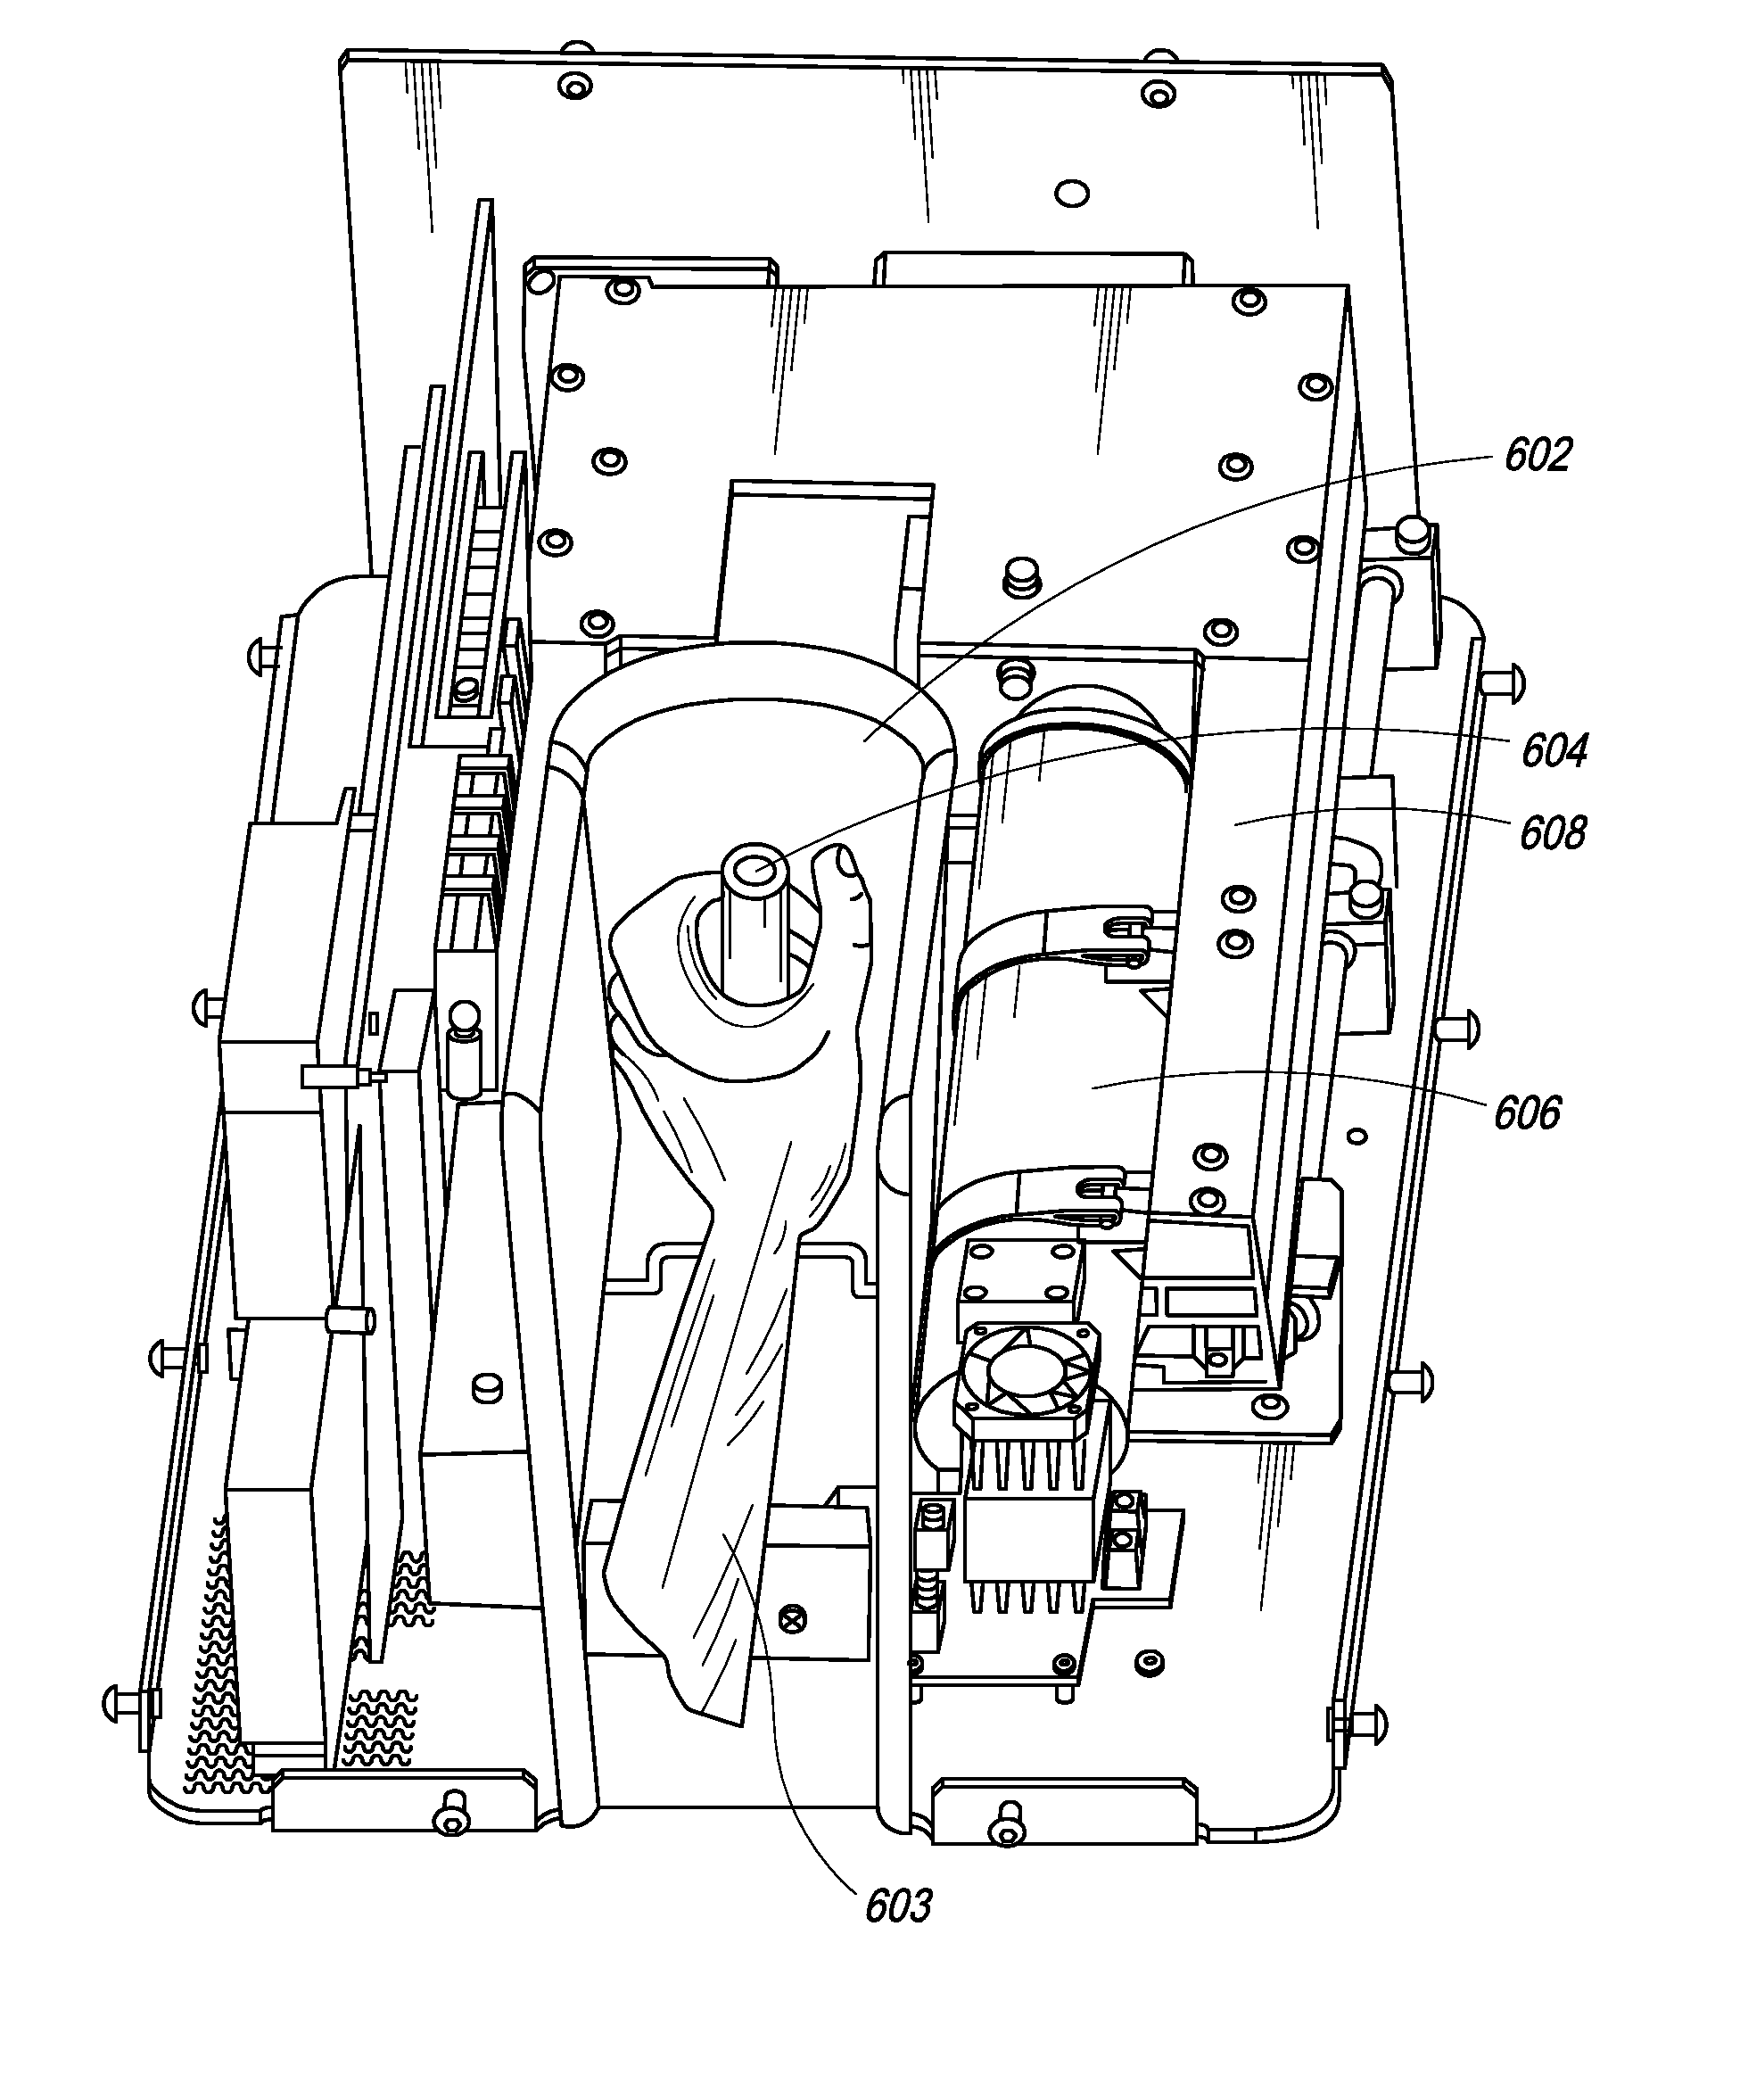 Apparatus for bone density assessment and monitoring